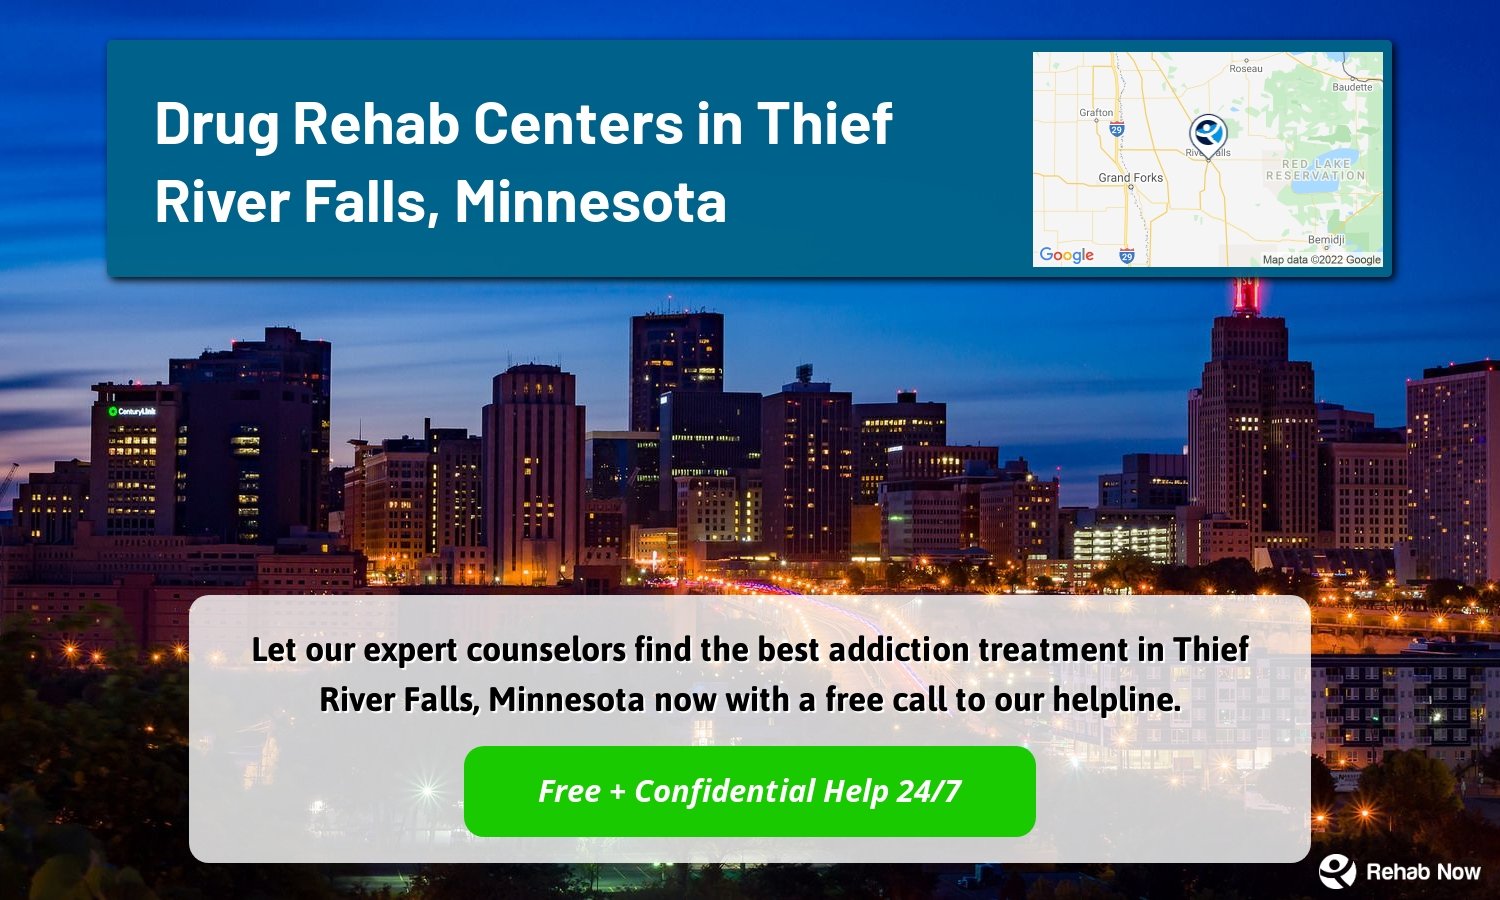 Let our expert counselors find the best addiction treatment in Thief River Falls, Minnesota now with a free call to our helpline.